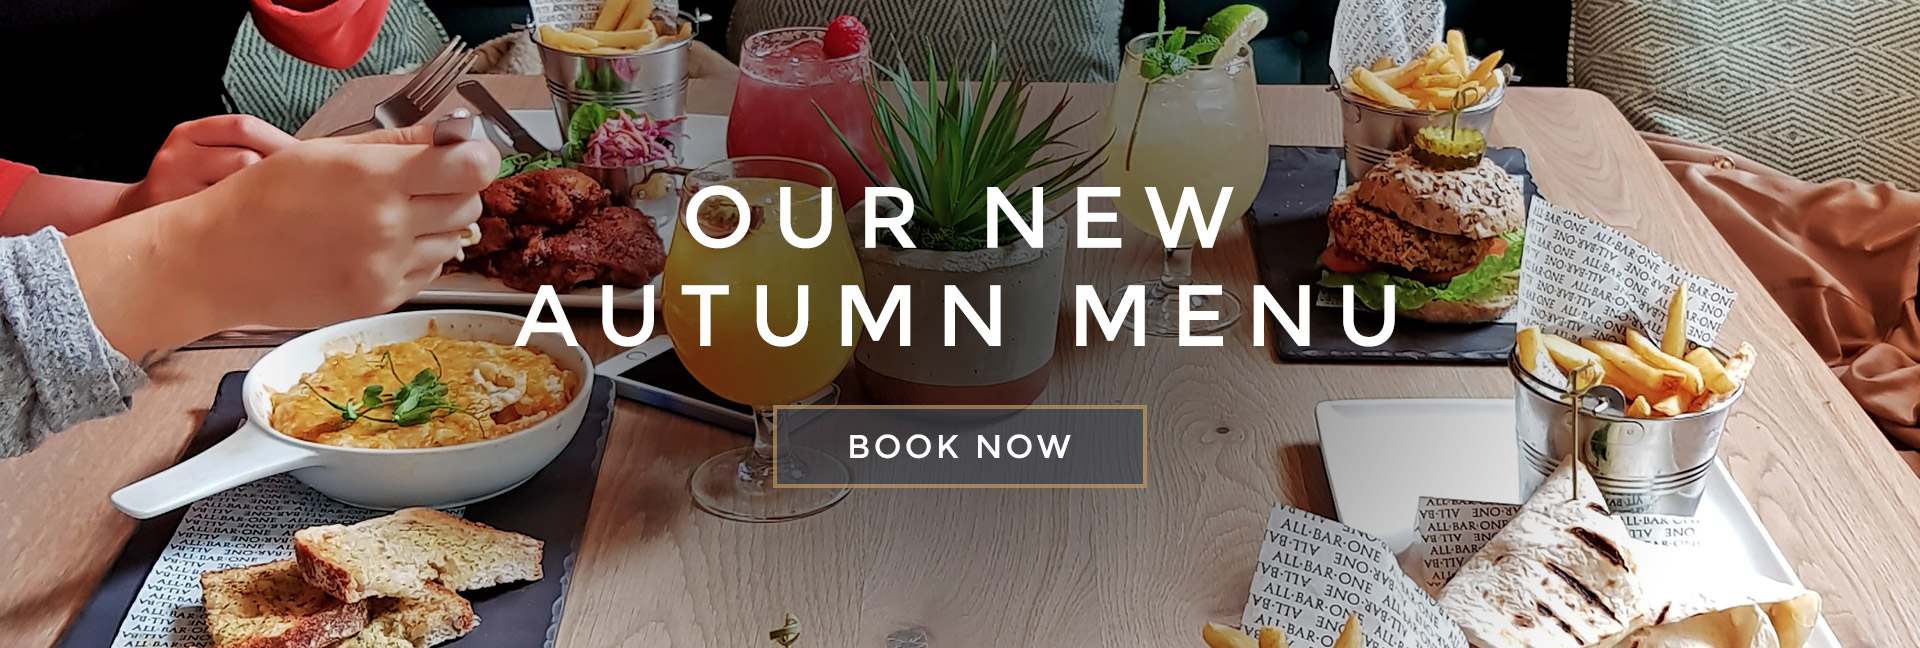 Our new Autumn menu at All Bar One Regent Street - Book now